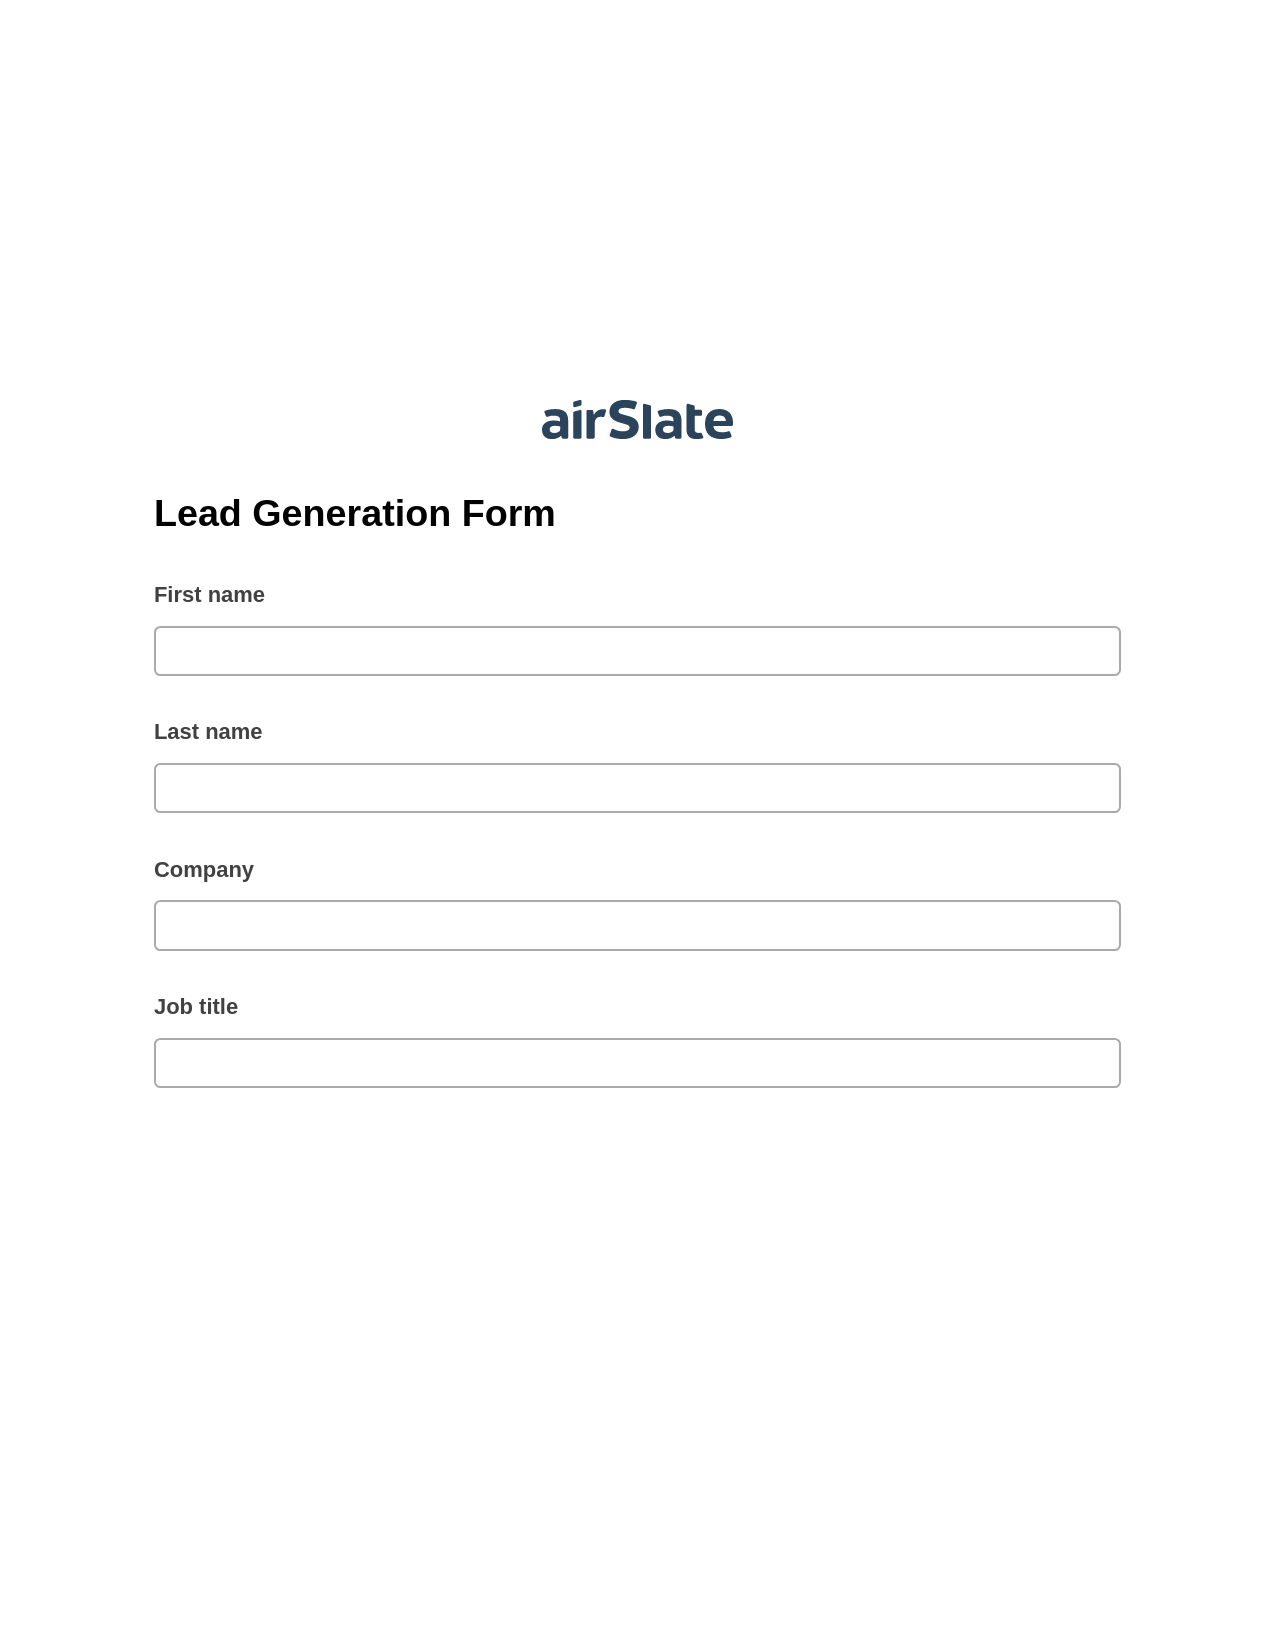 Lead Generation Form Pre-fill Document Bot, Remove Tags From Slate Bot, Webhook Postfinish Bot